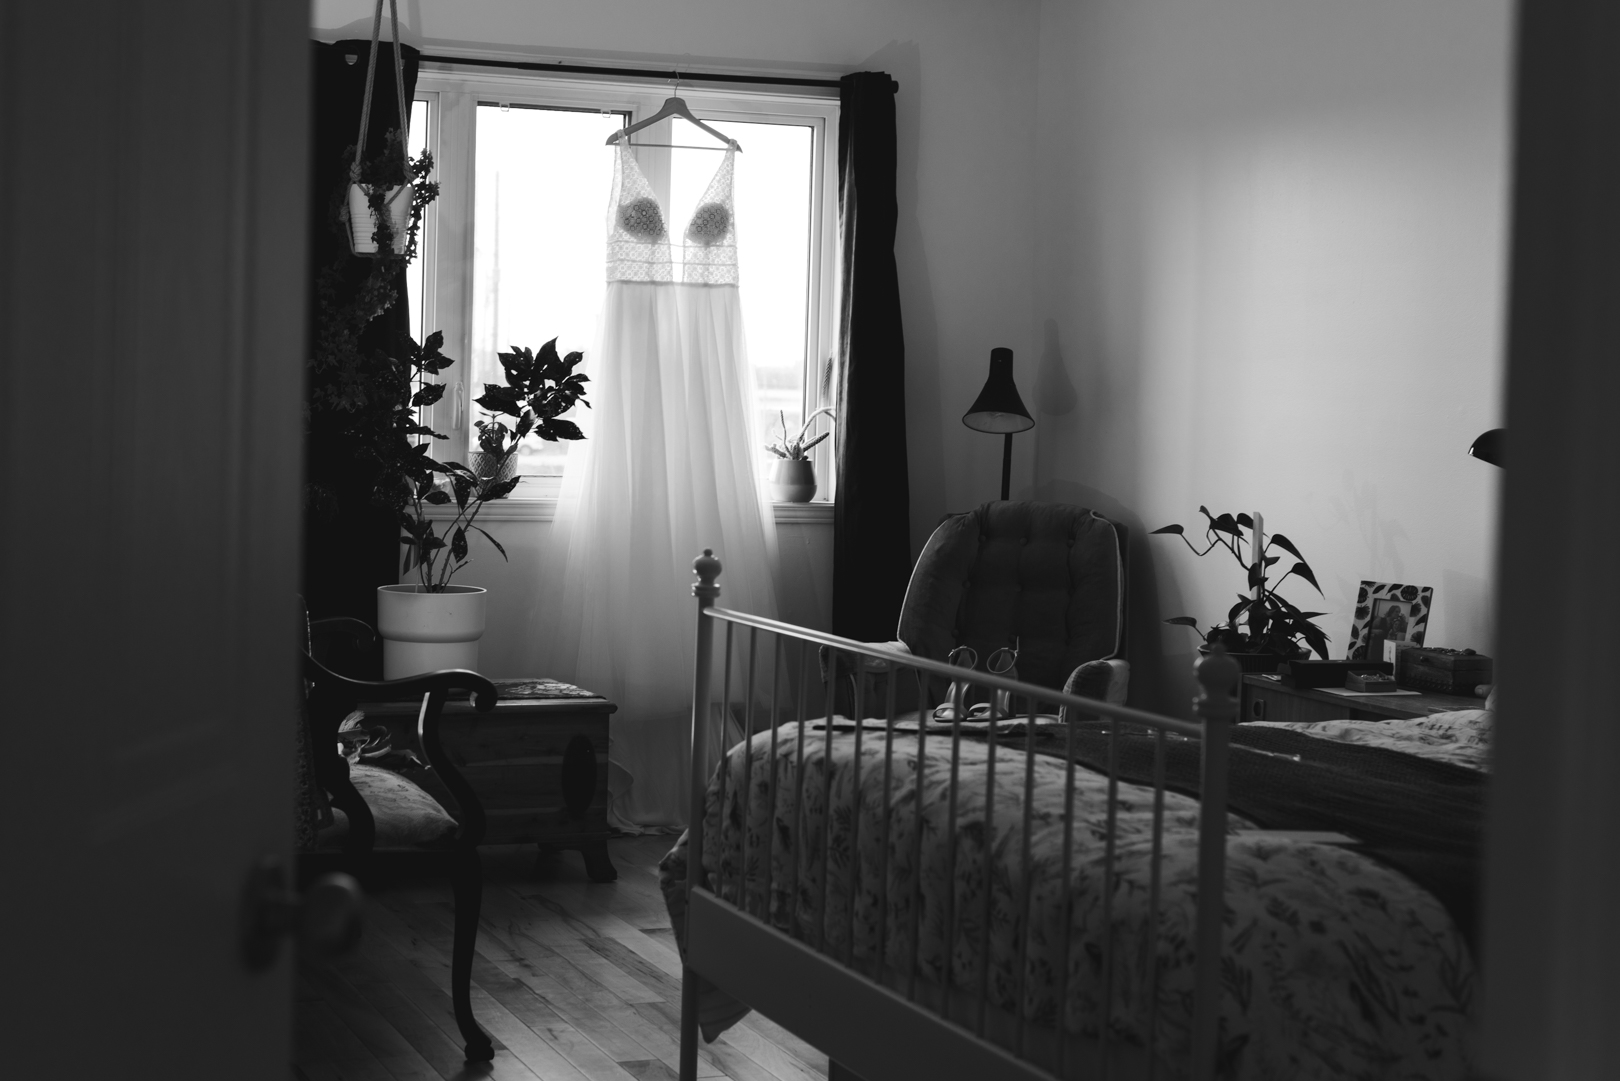 wedding dress hanging from bedroom window in black and white